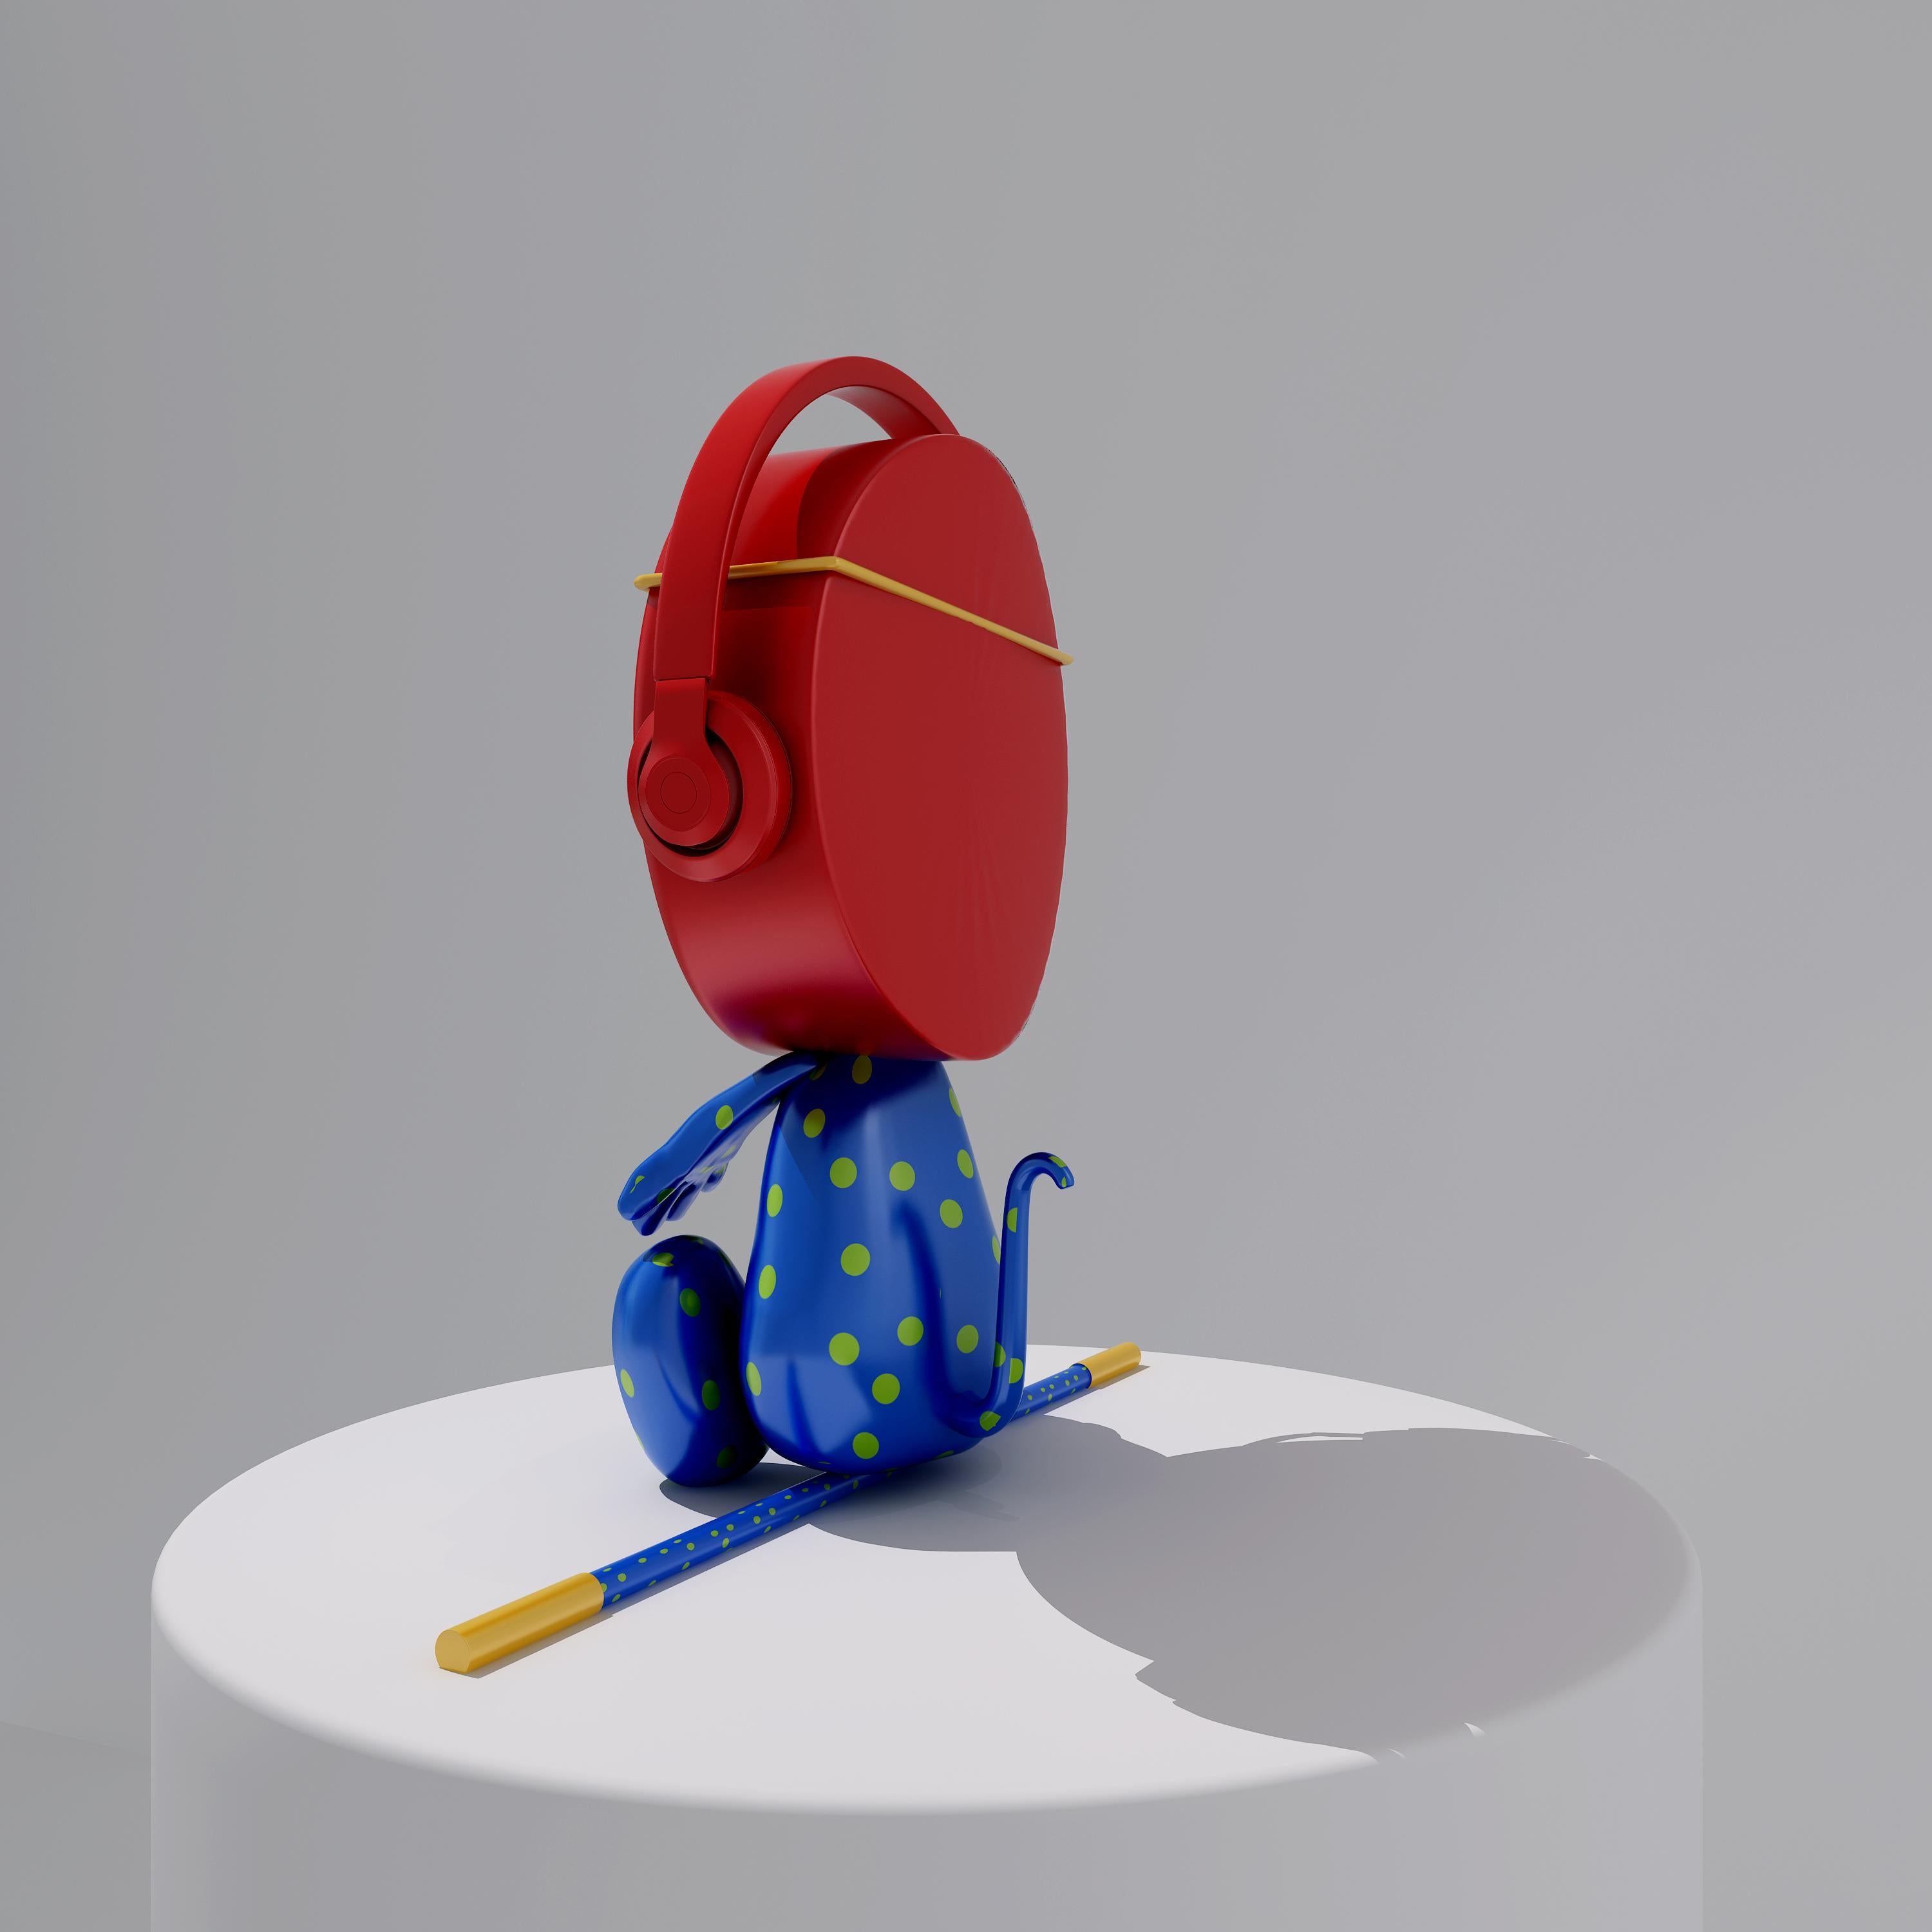 Limited Edition Pop Trendy Art Sculpture: Clock Blue & Red Color Monkey King - Gray Figurative Sculpture by Wang Ninghua